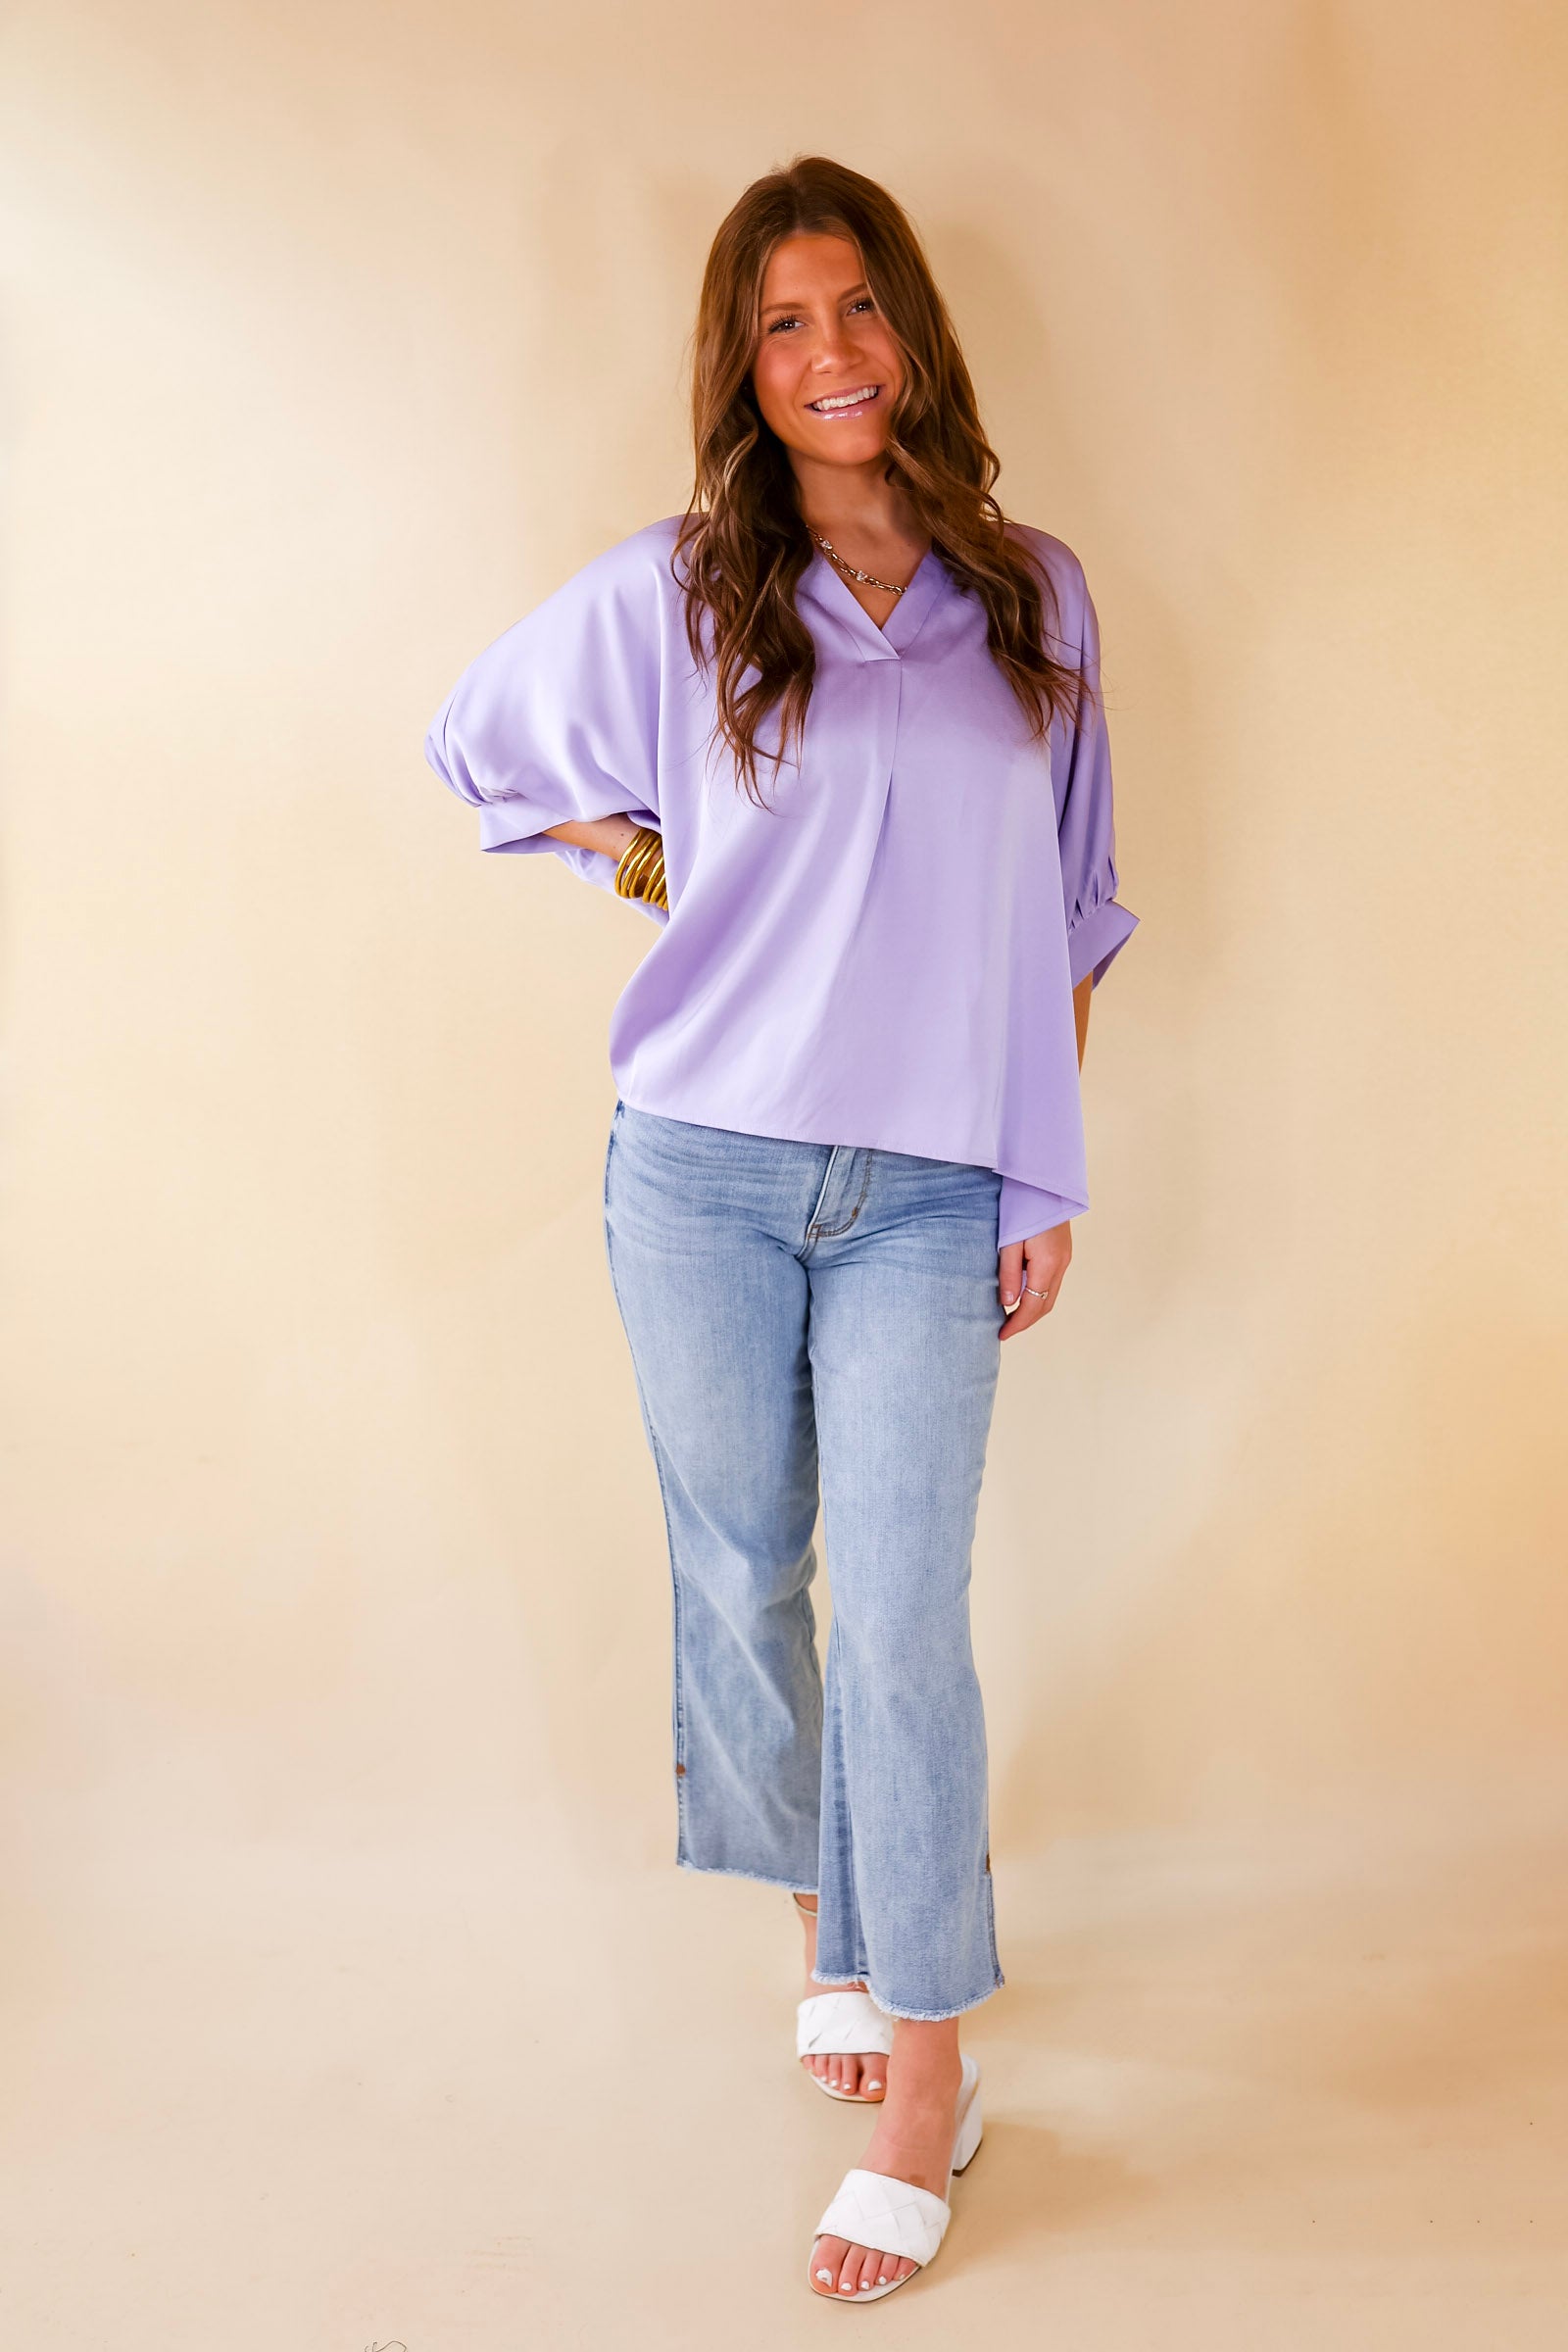 Irresistibly Chic Half Sleeve Oversized Blouse in Lilac Purple - Giddy Up Glamour Boutique